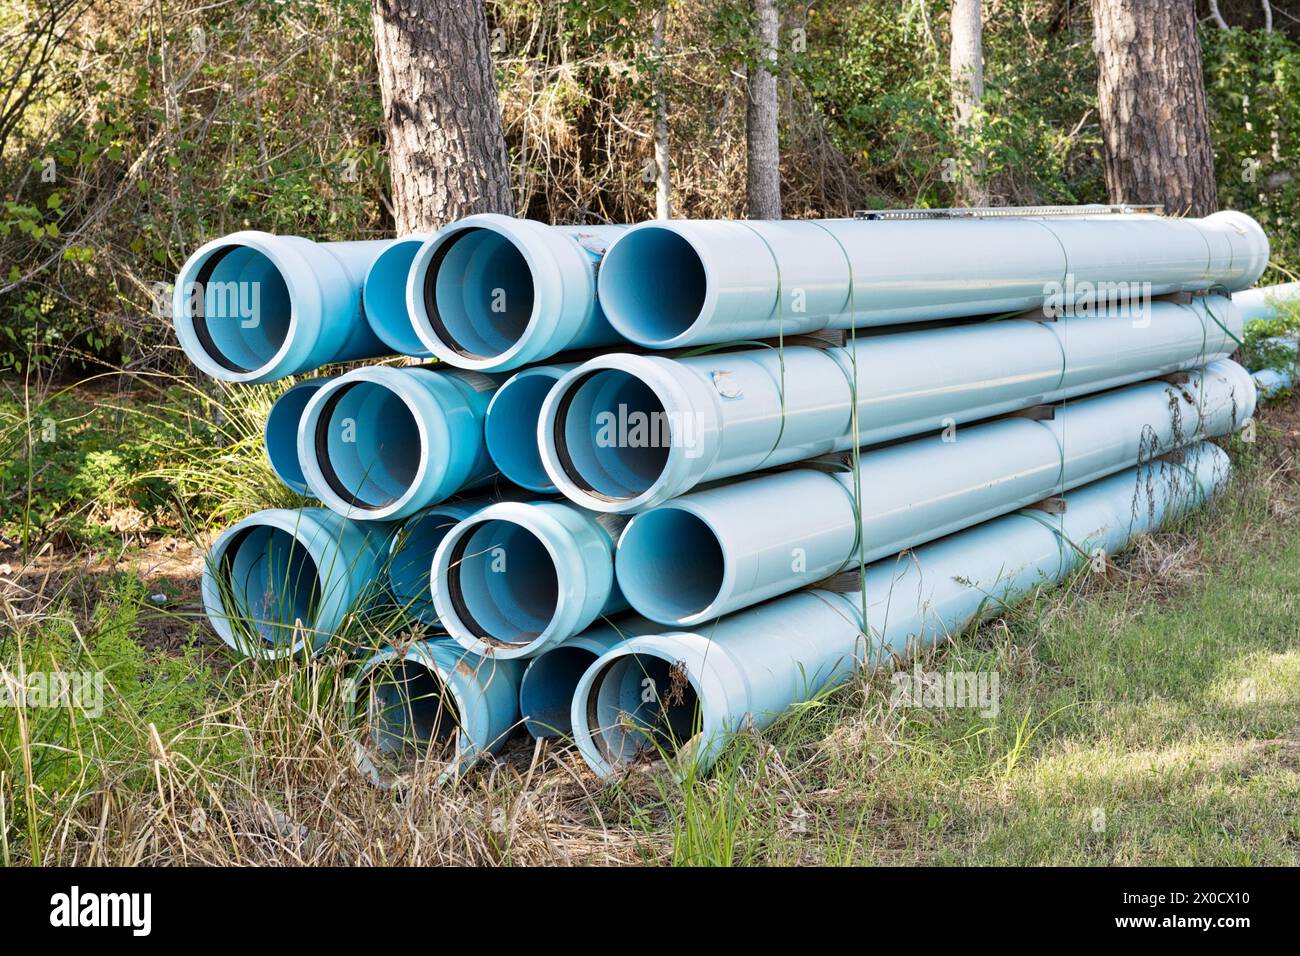 Pipes bundle for underground water mains construction, sewer pvc blue plastic industrial equipment by woodland area, Houston TX USA. Stock Photo